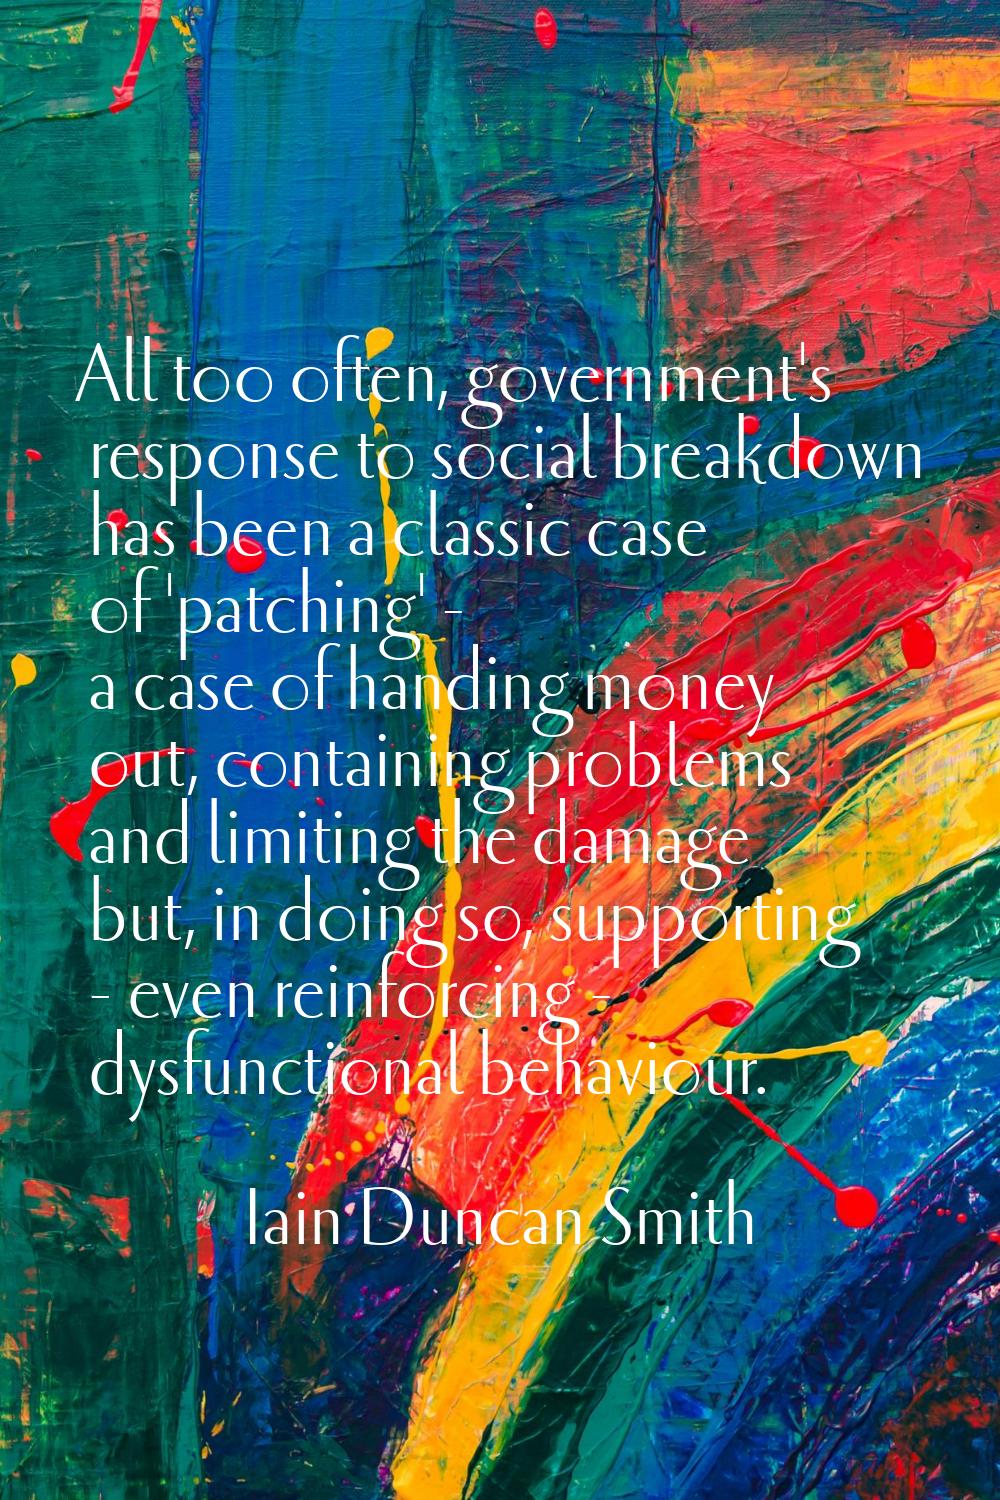 All too often, government's response to social breakdown has been a classic case of 'patching' - a 